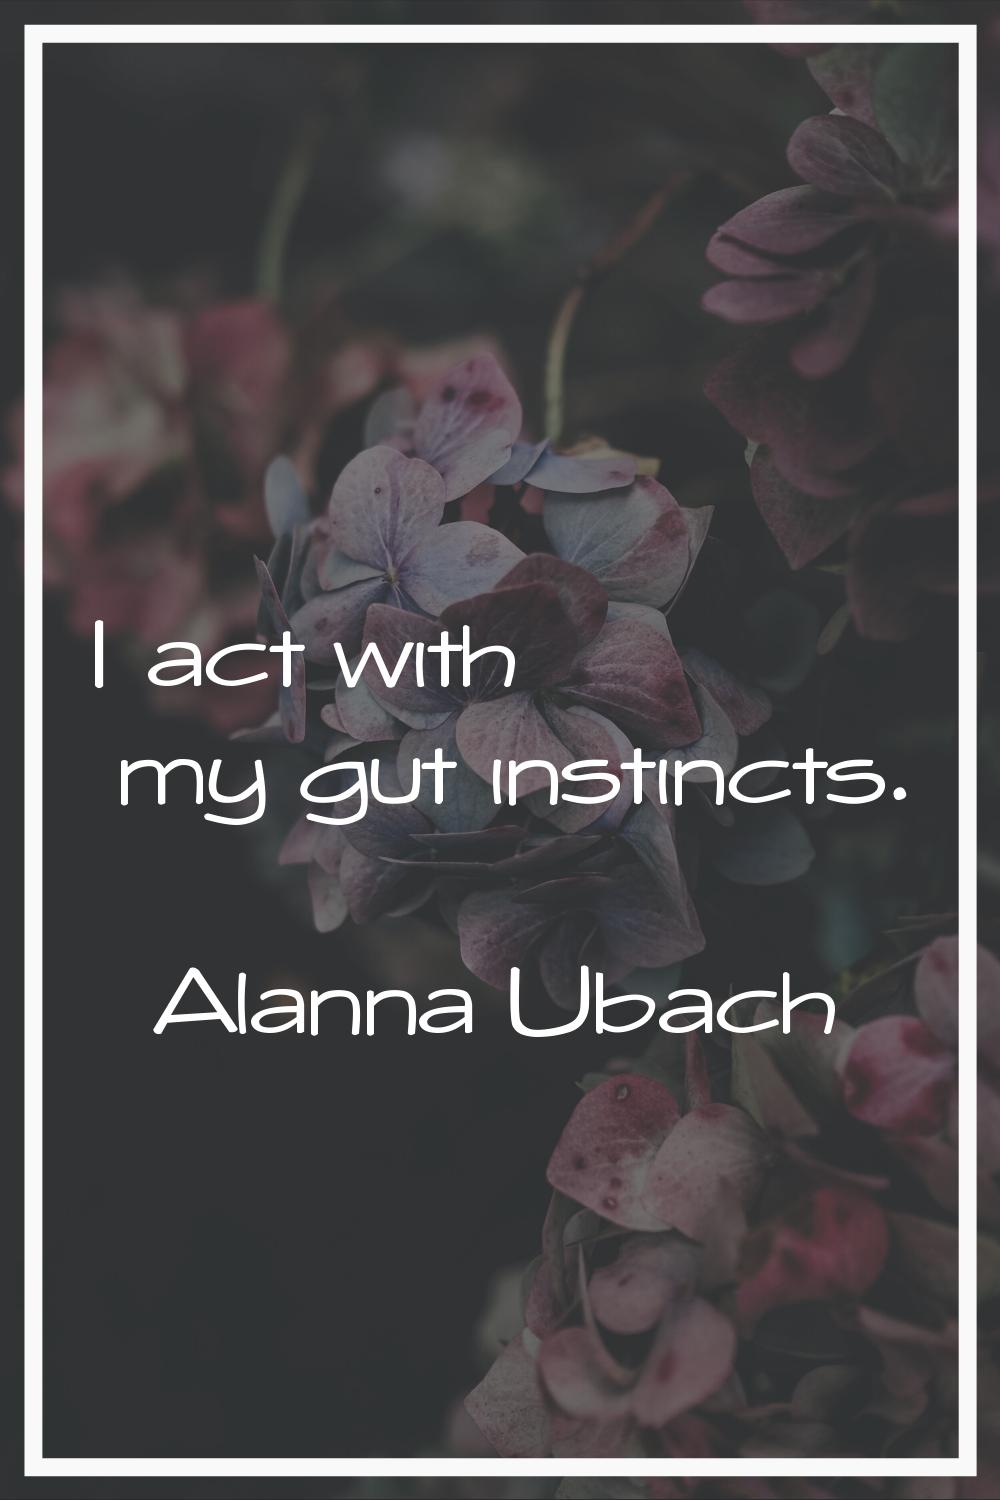 I act with my gut instincts.